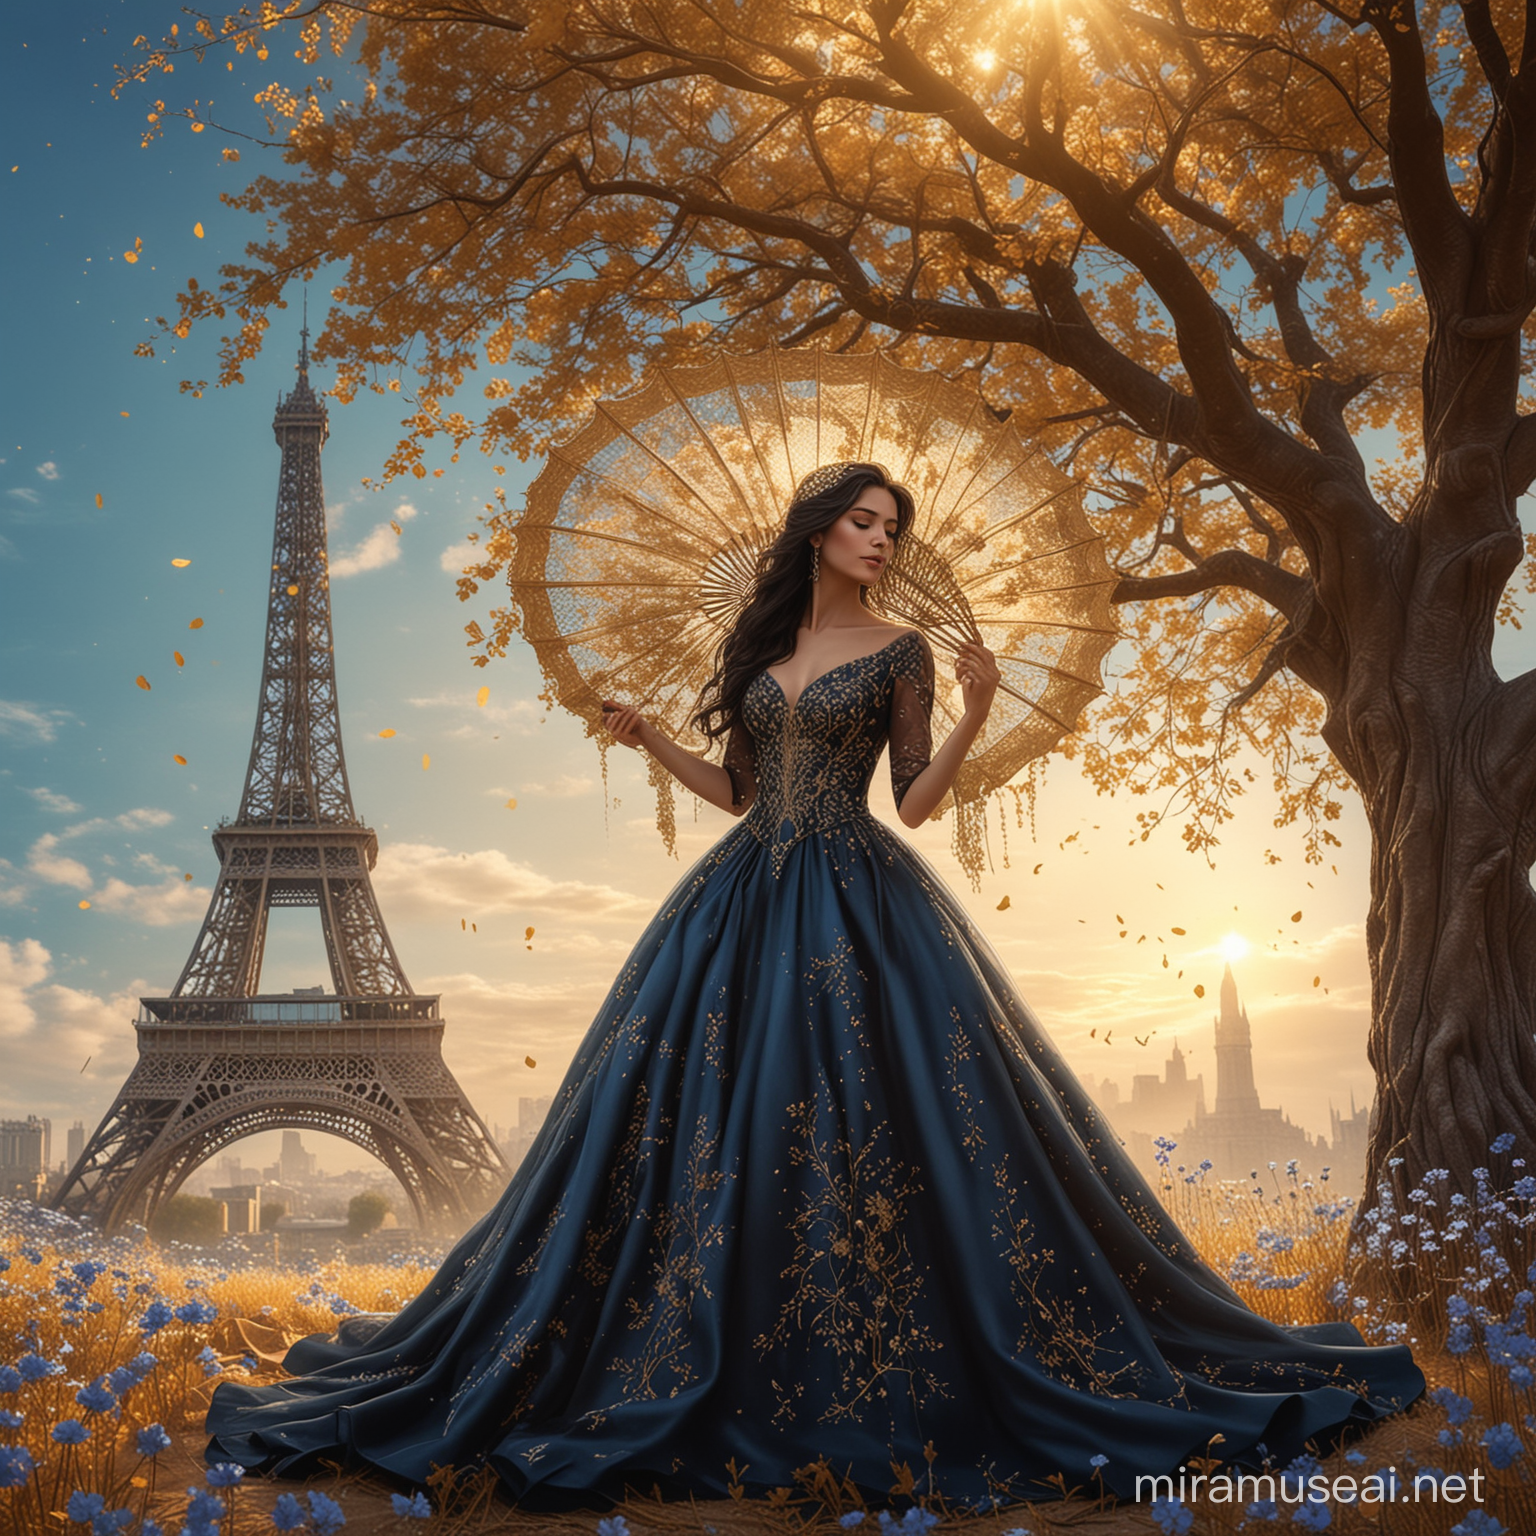 Elegant Woman Standing Under Floral Tree with Golden Dust